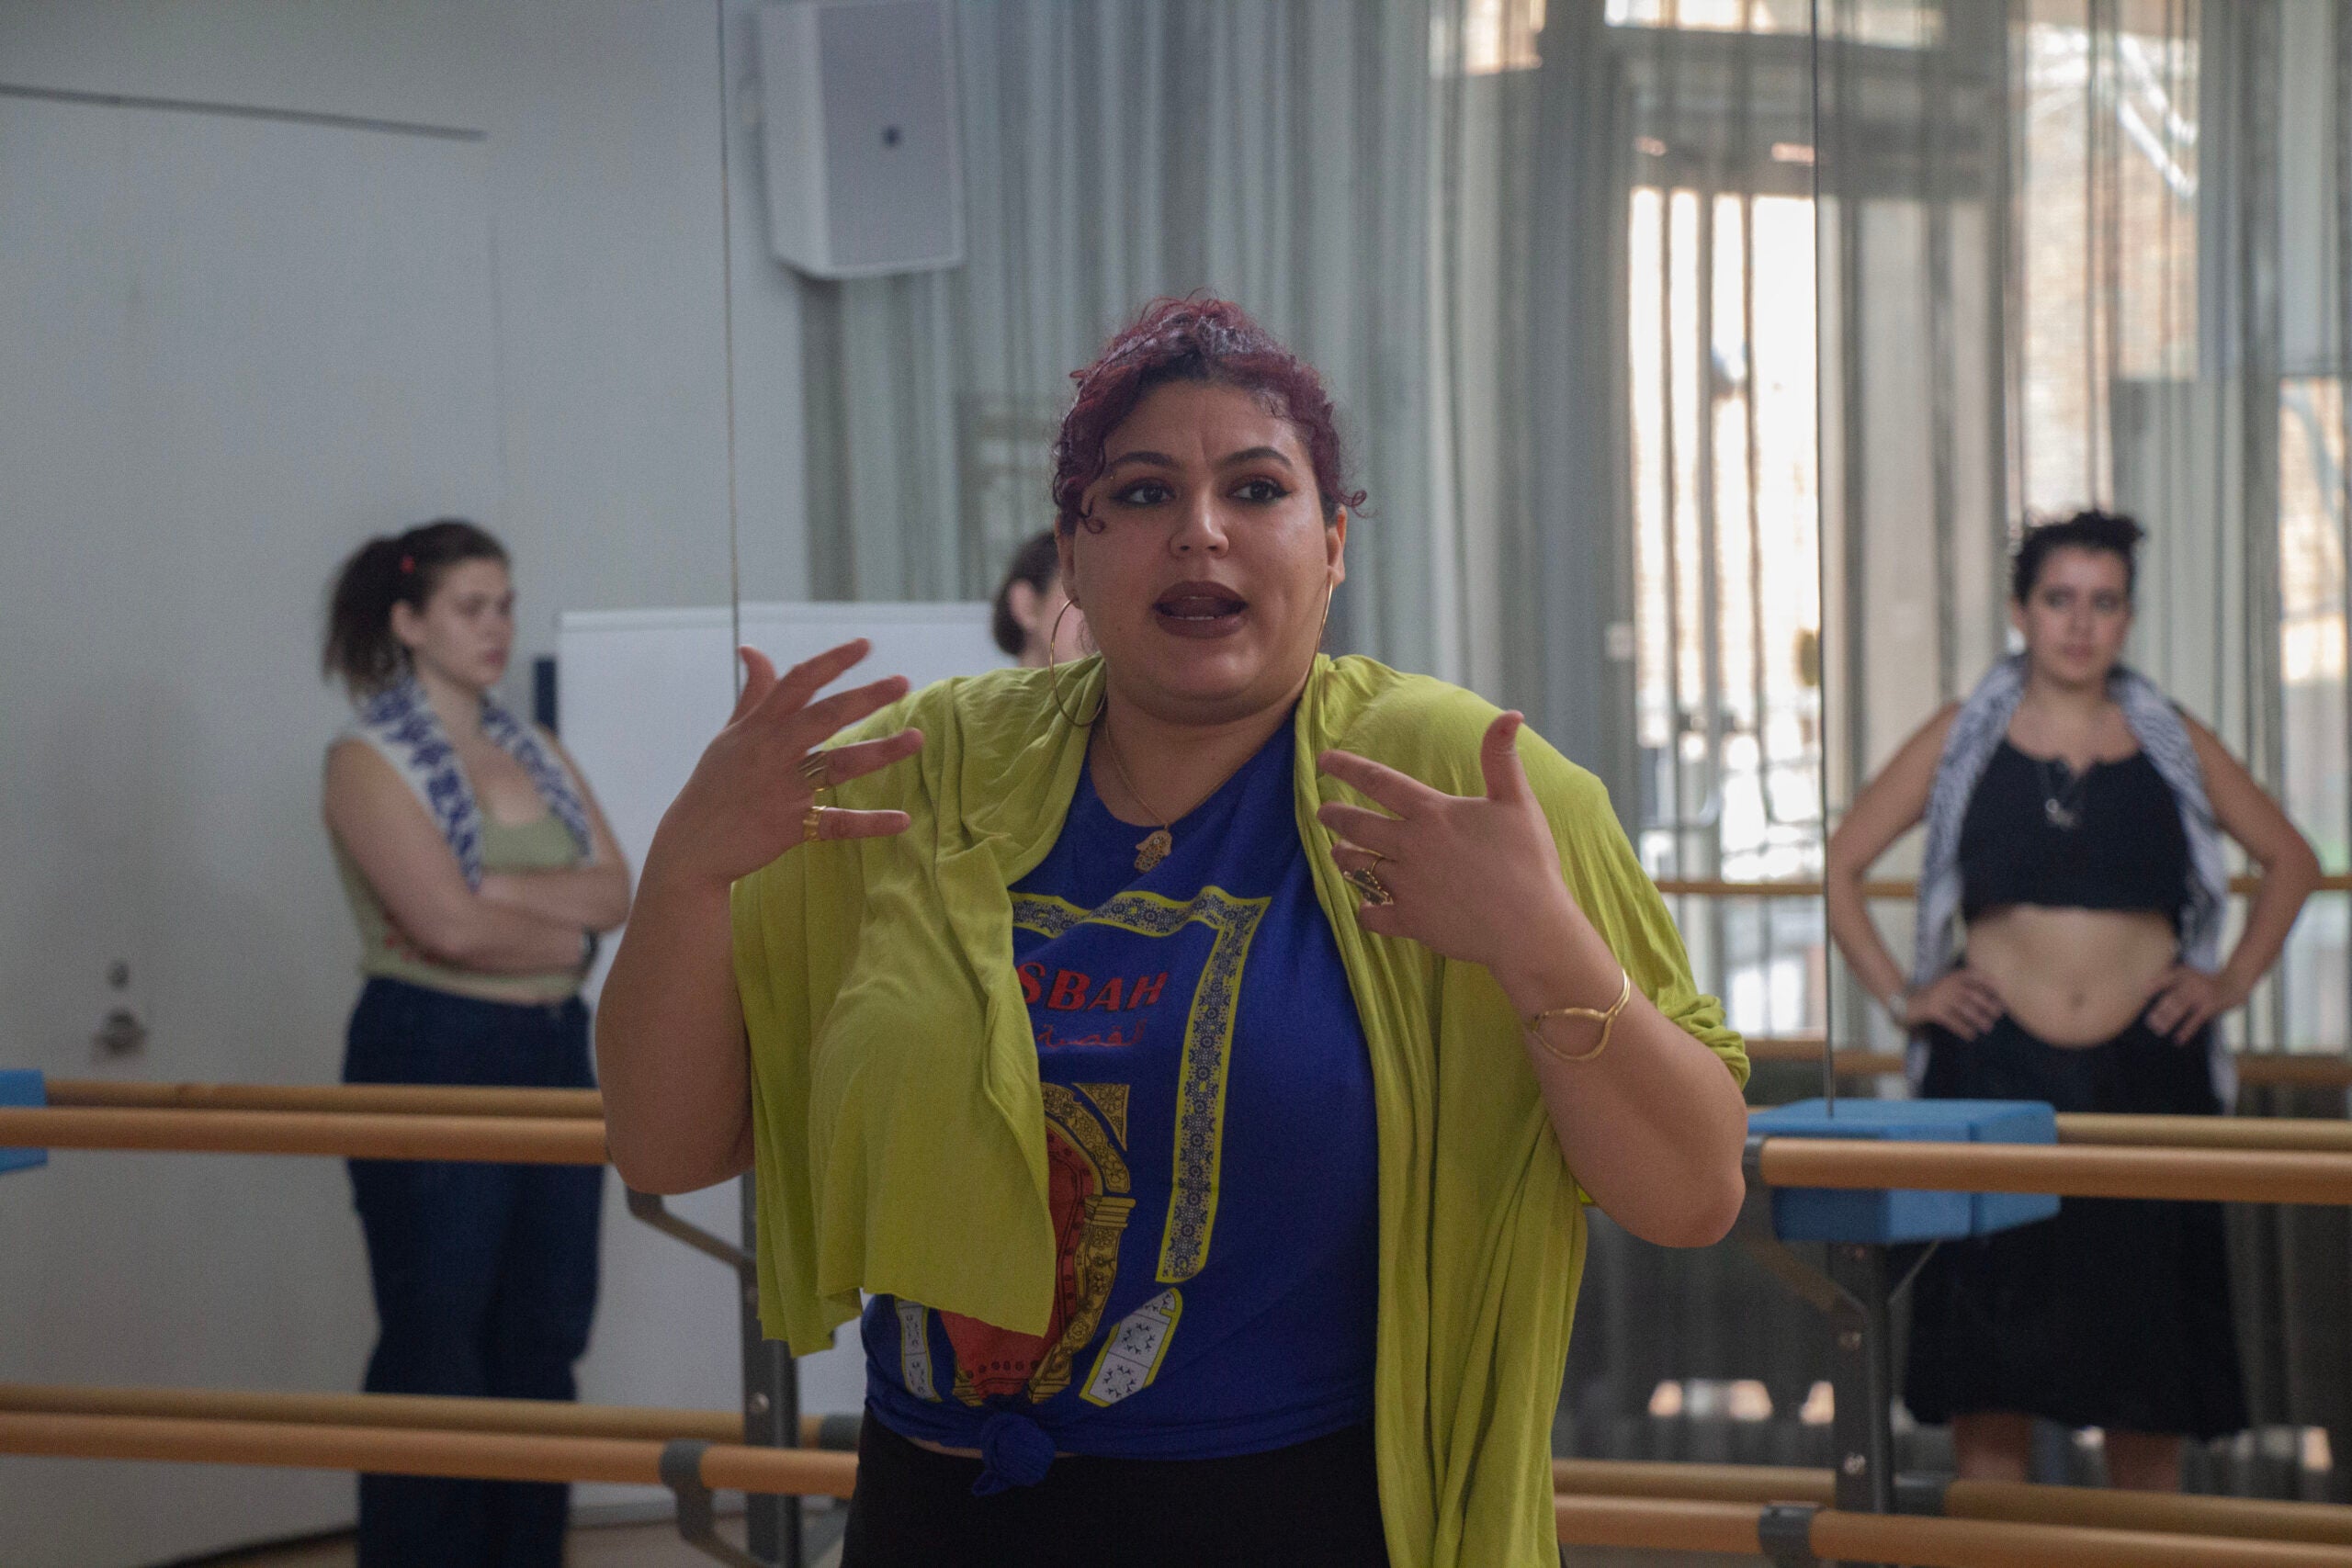 Warda, in a blue shirt, hoops, bold lipstick and lime green shawl over her shoulders, is addressing a dance studio full of eager participants.